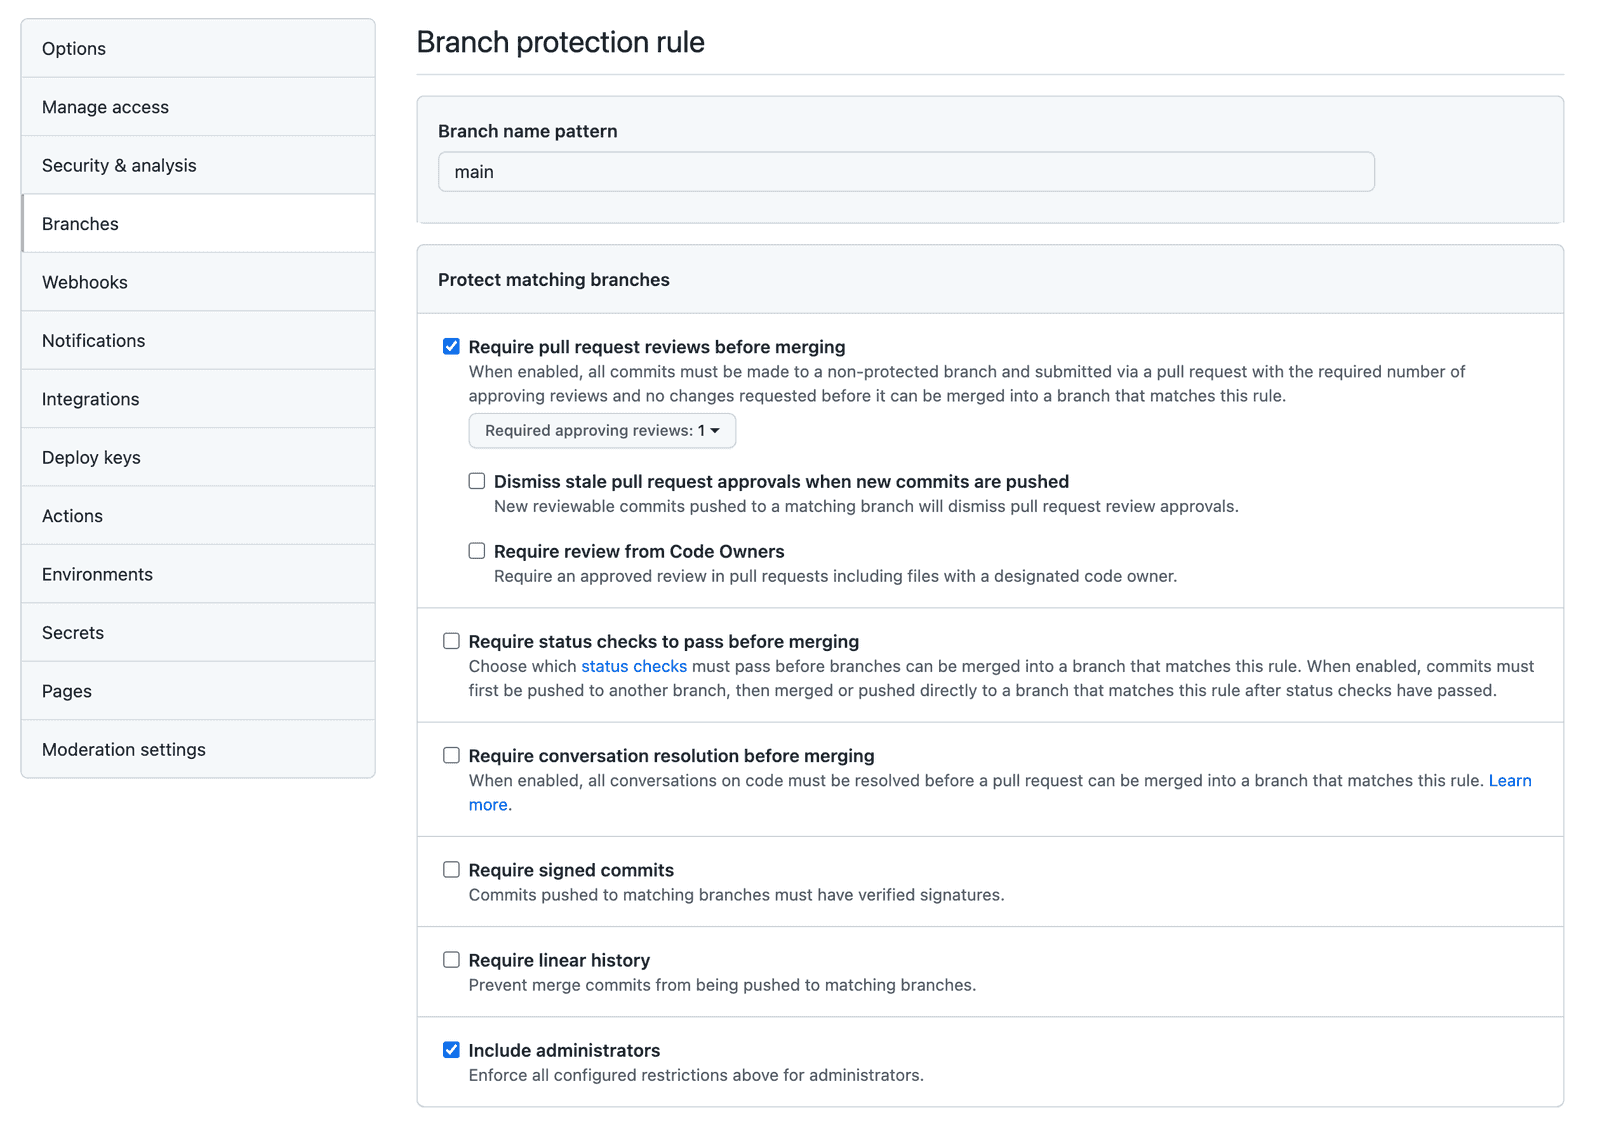 Enabling branch protection rules in Github